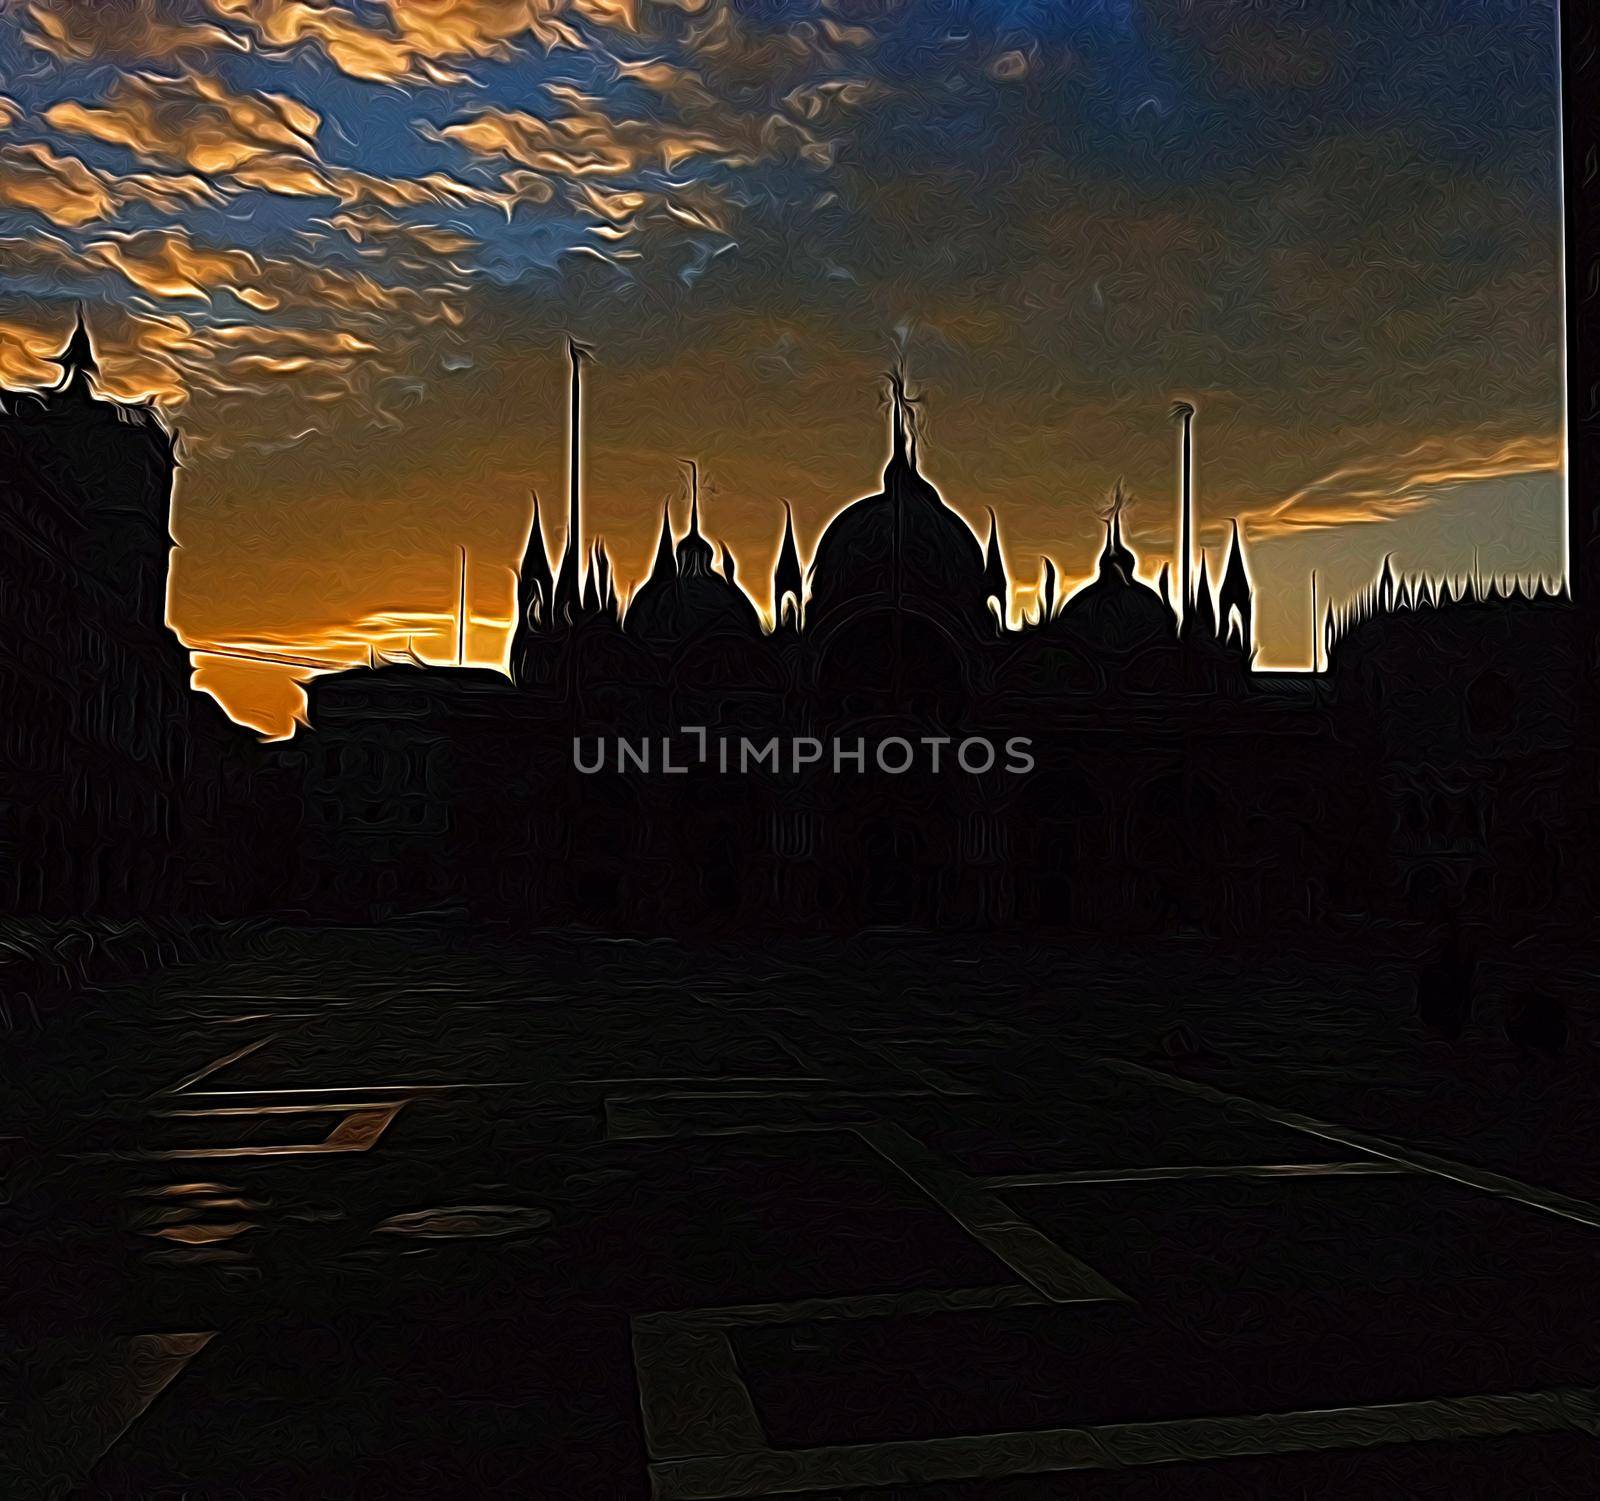 Digital color painting style representing the square of Venice during sunrise